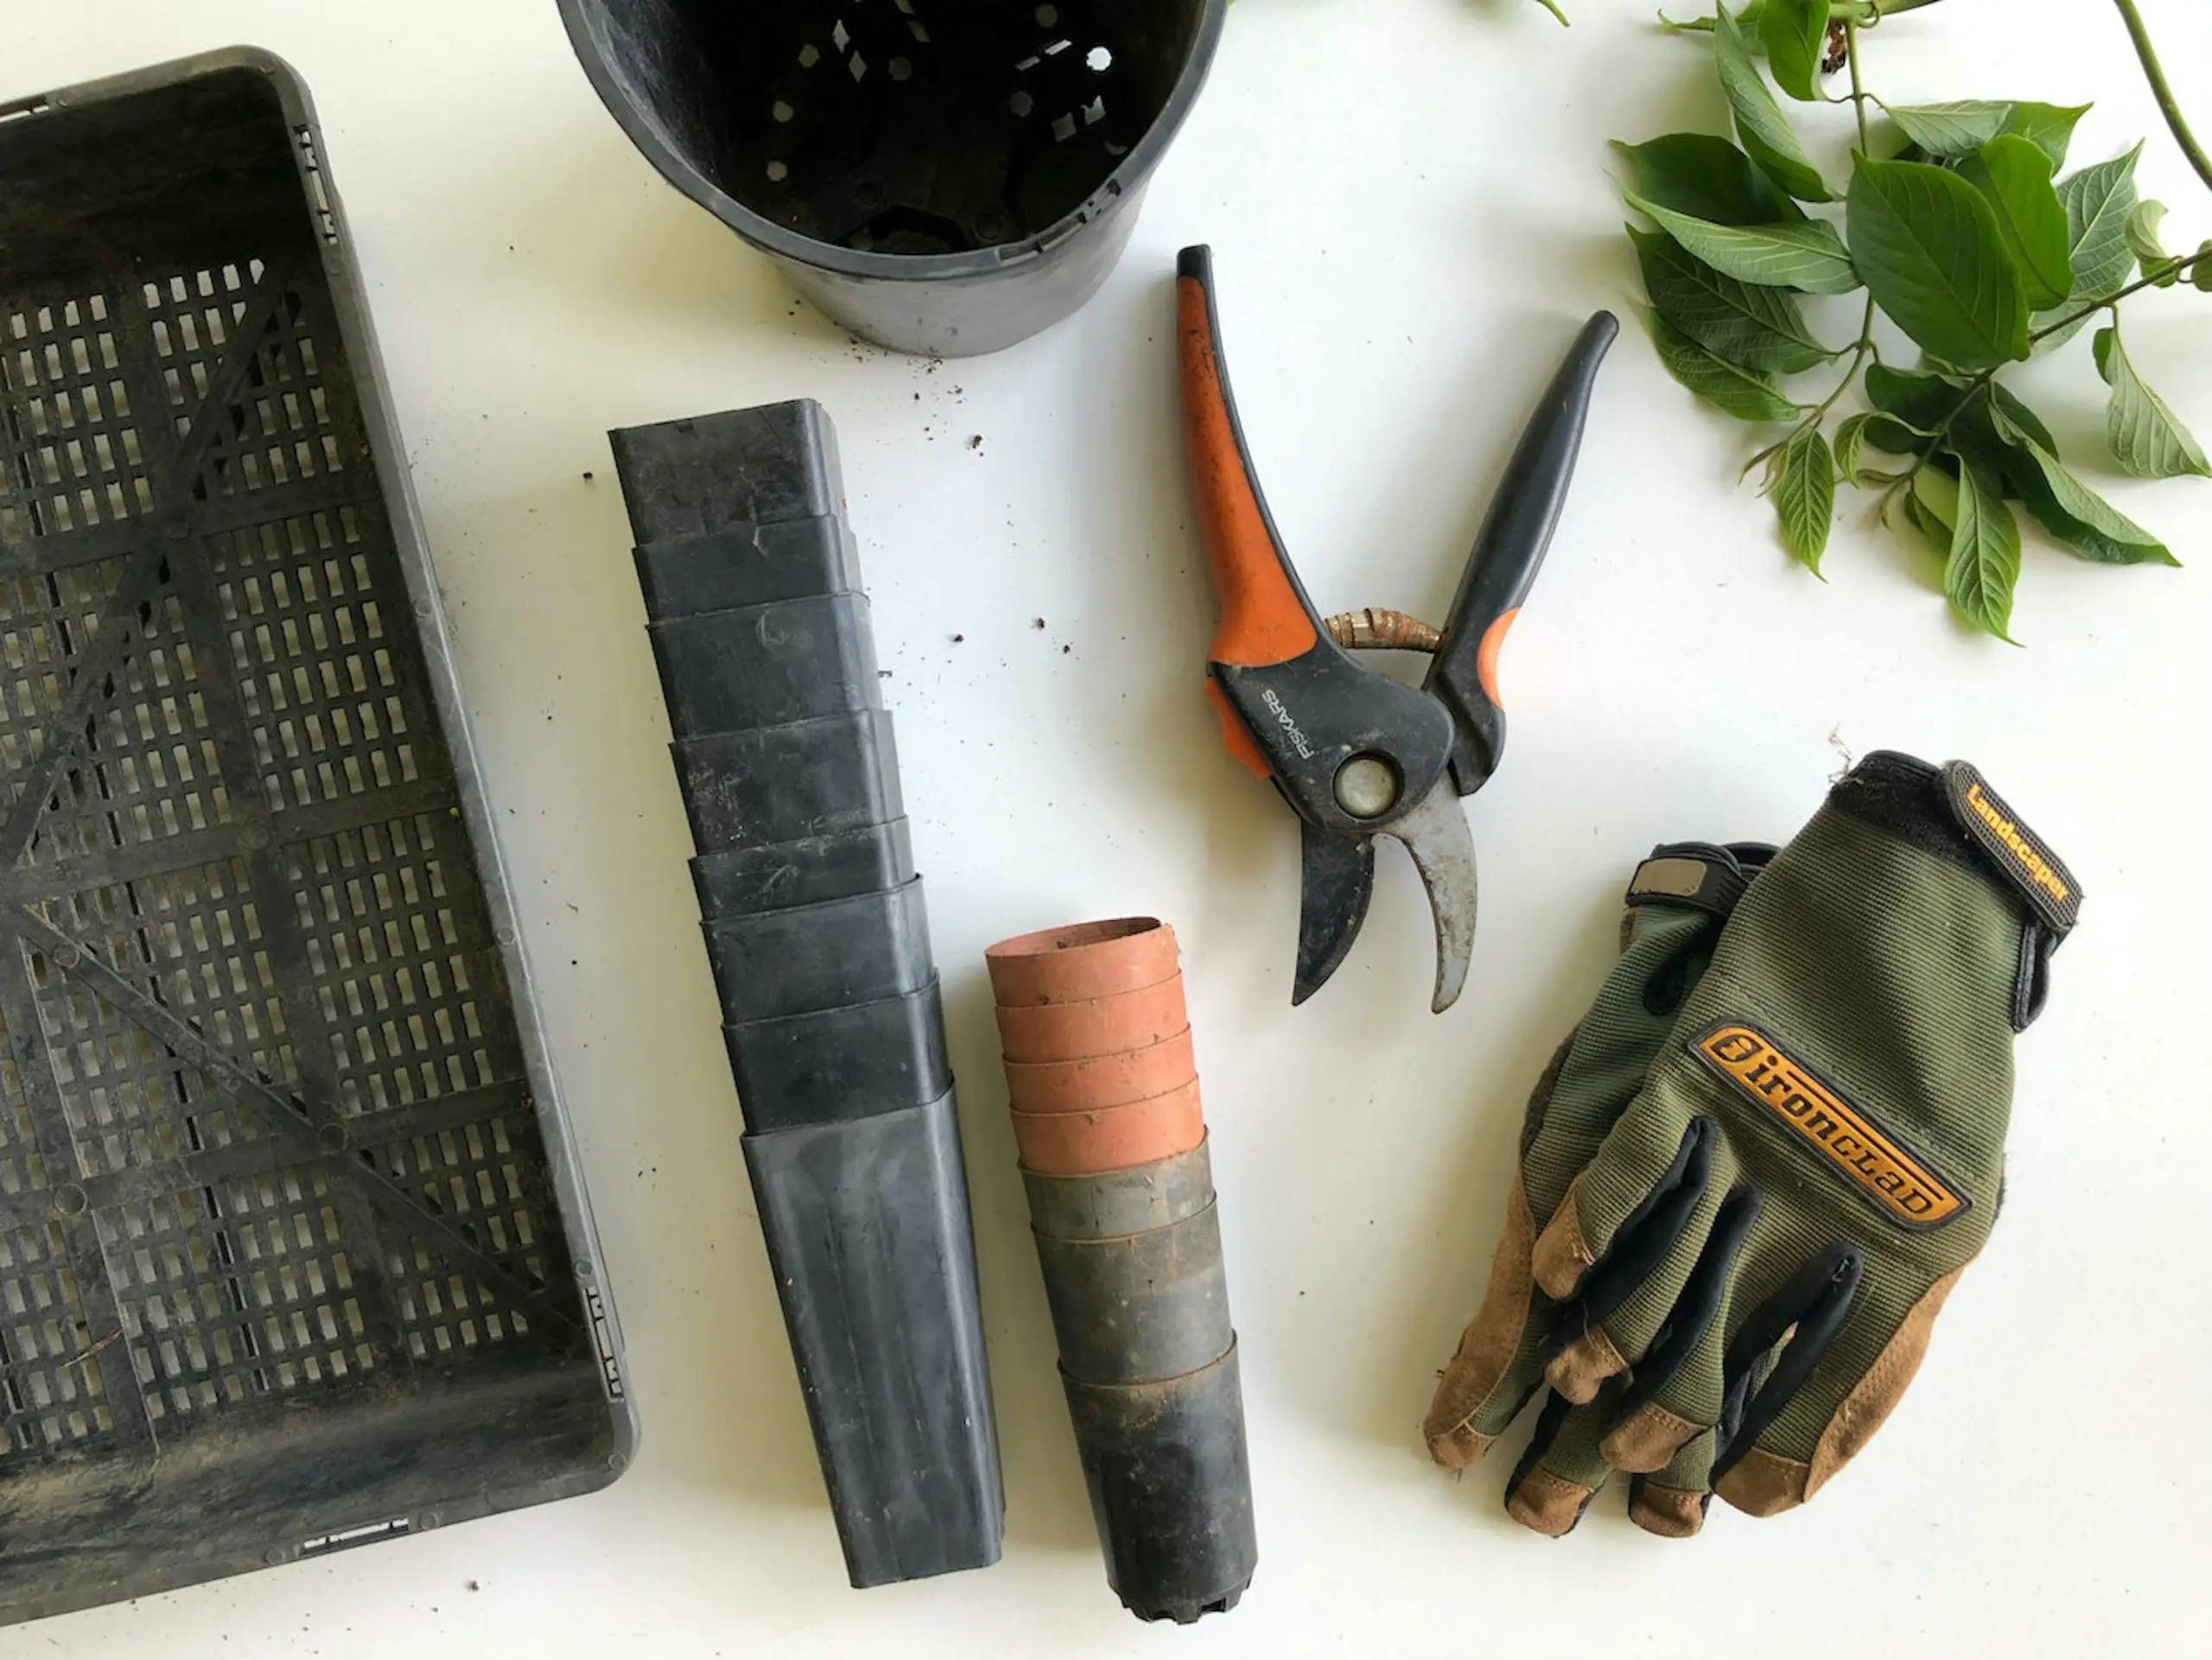 Gardening Tools: Maintenance and Care